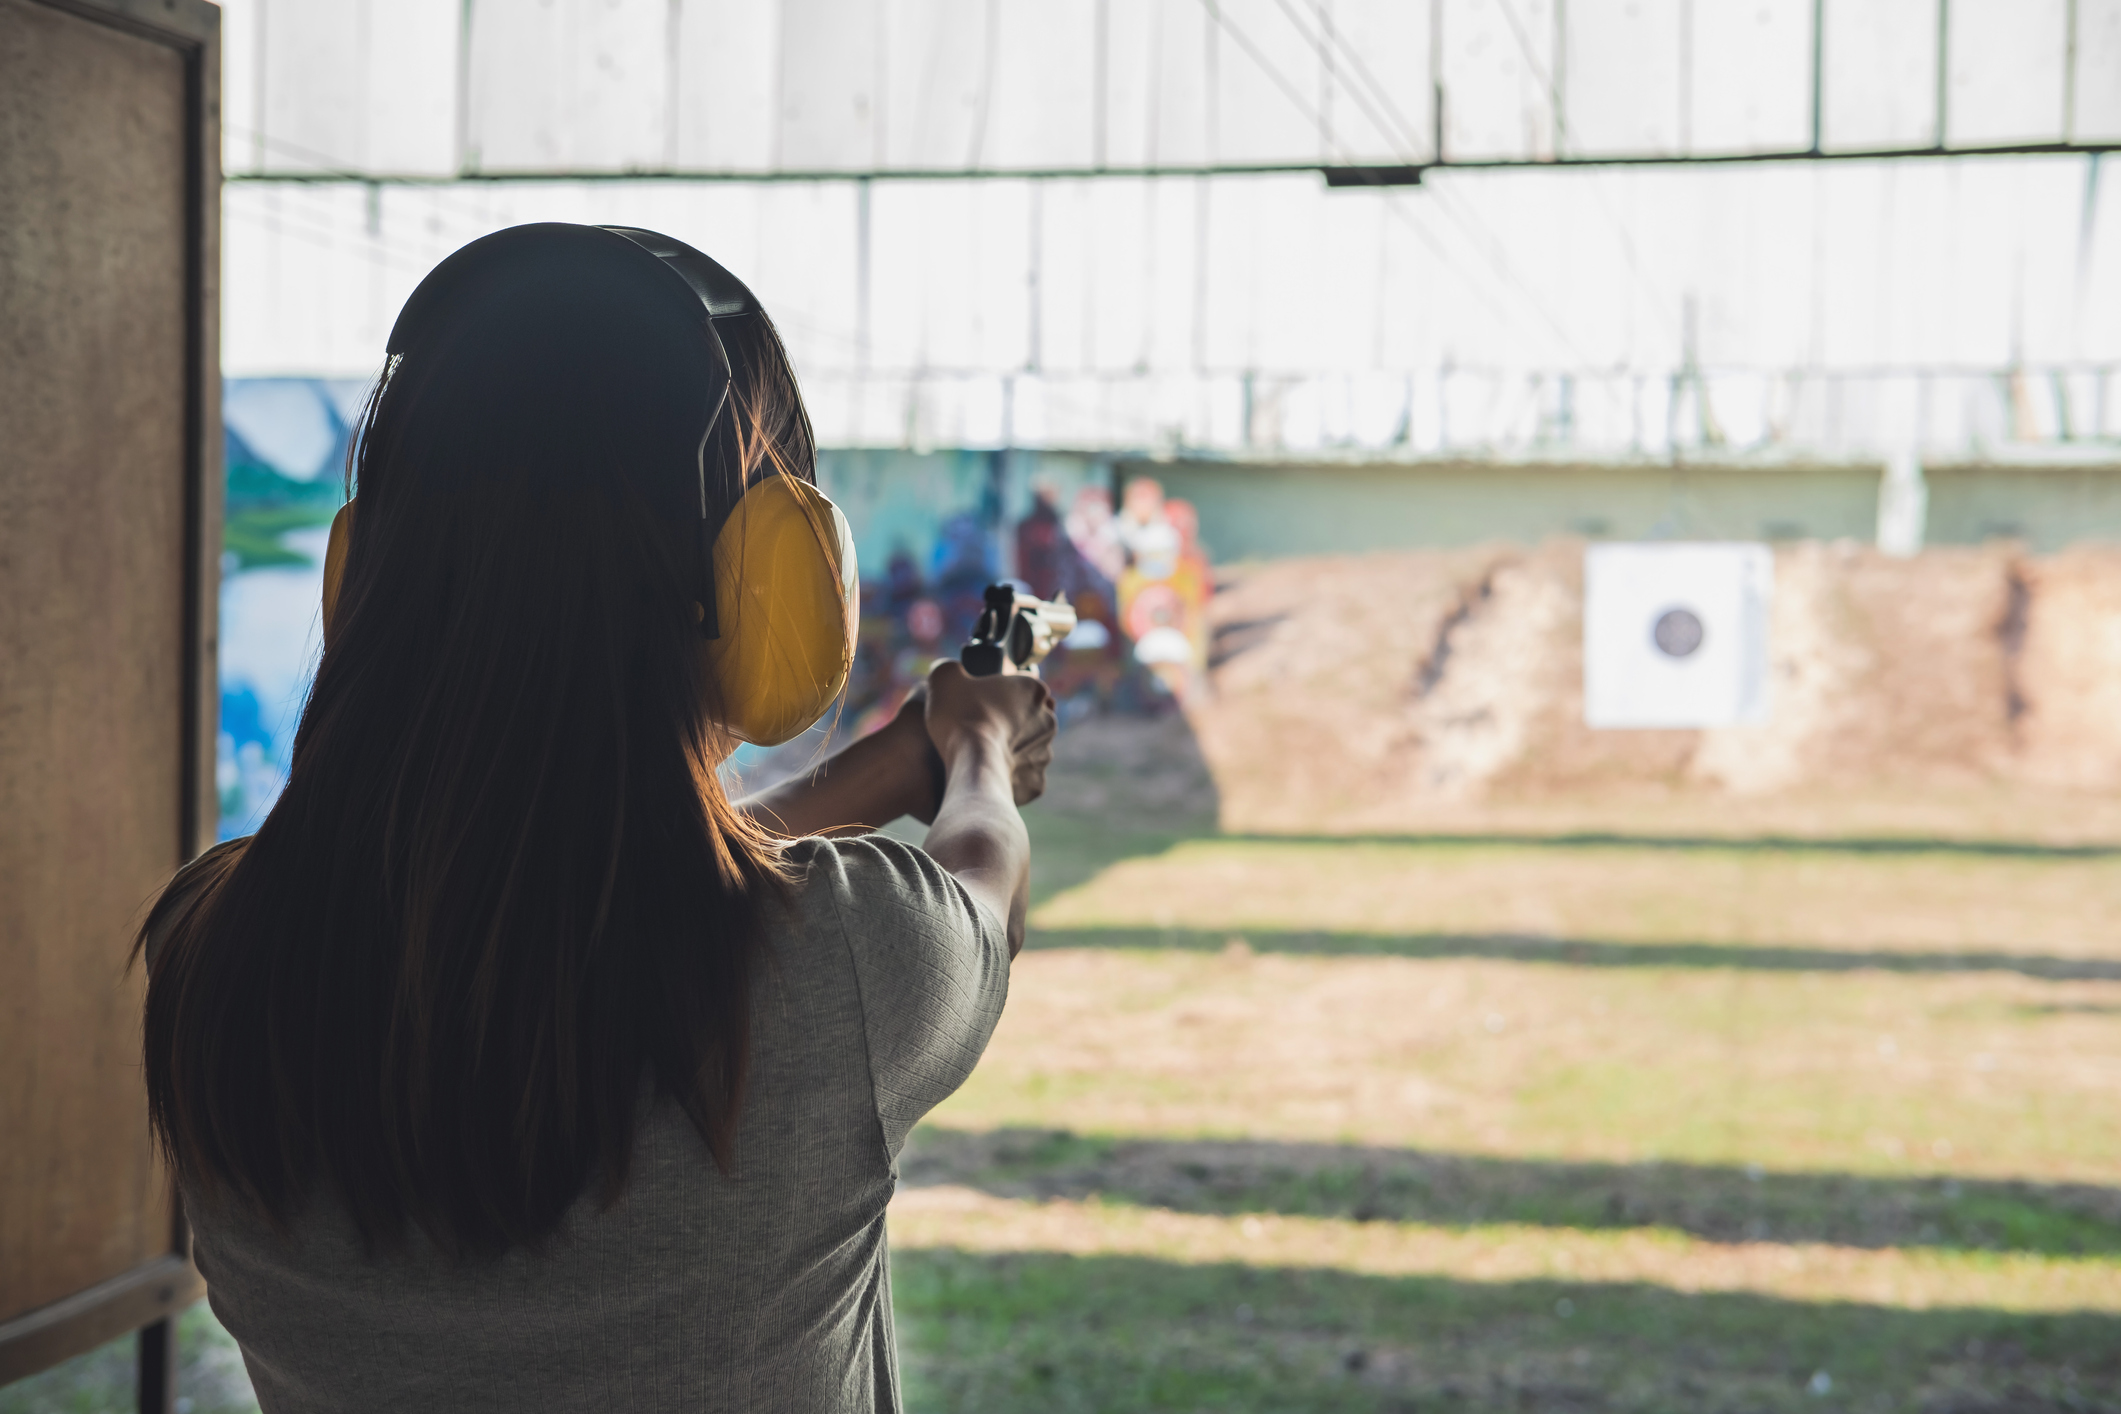 Why Firearms Training is Important for Homeowners